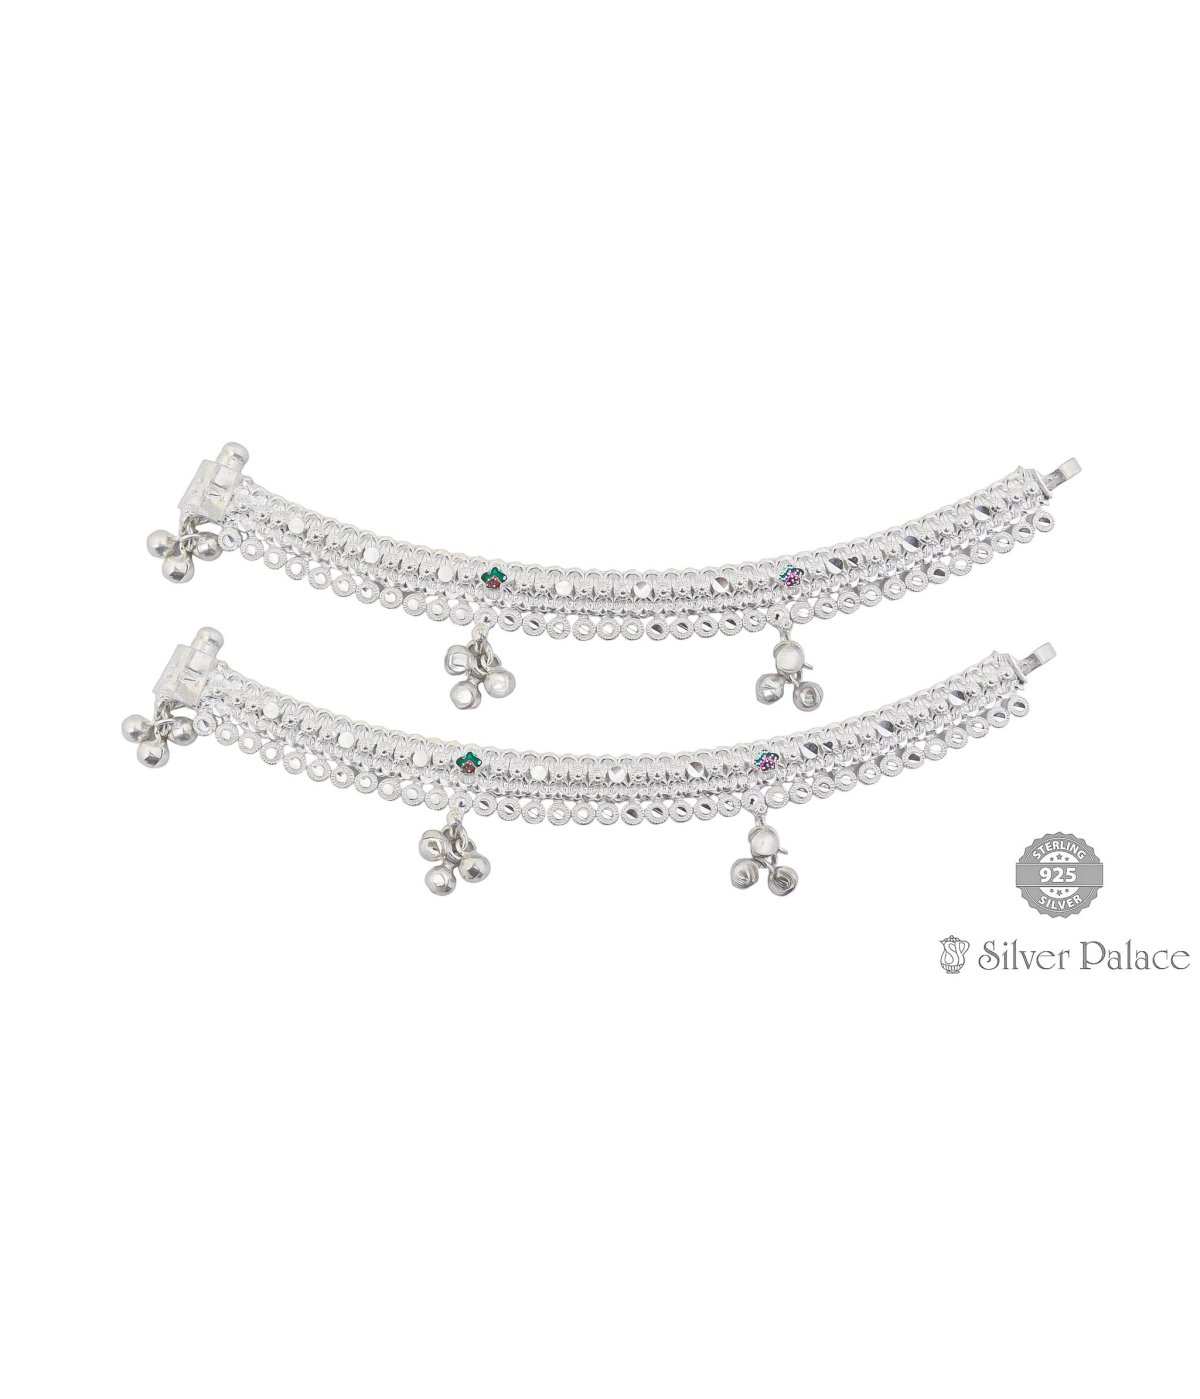 PURE SILVER HANDMADE ANKLETS WITH THREE JINGLE BELLS FOR GIRLS & WOMEN